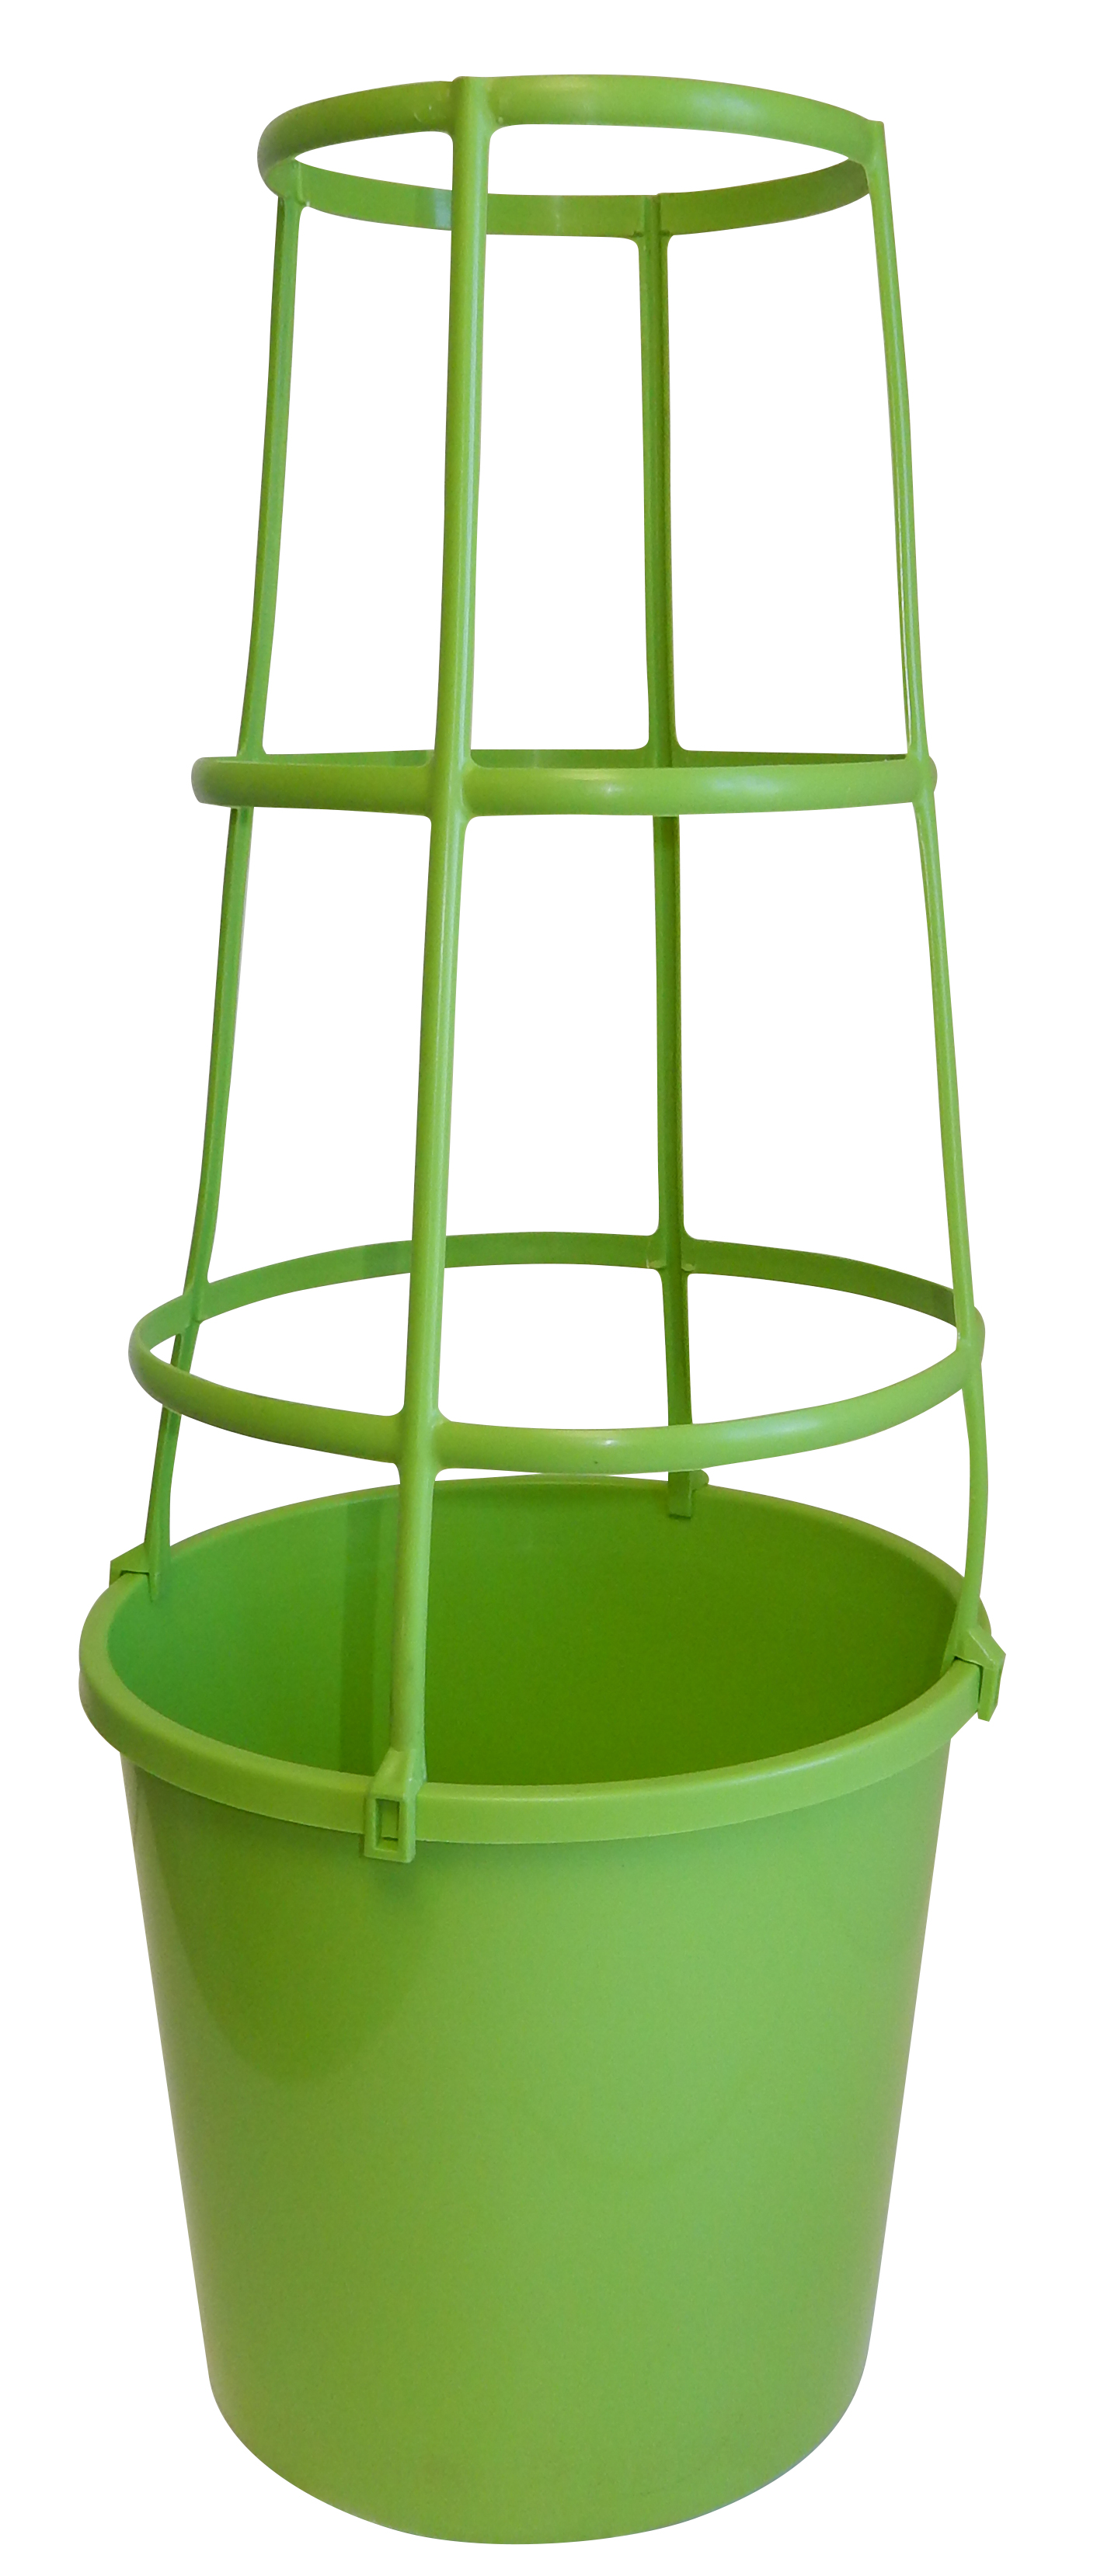 10.5 x 9.25 Tomato Cage Lime Green - 60 per case (Cage Only) | Decorative Planters | Sales